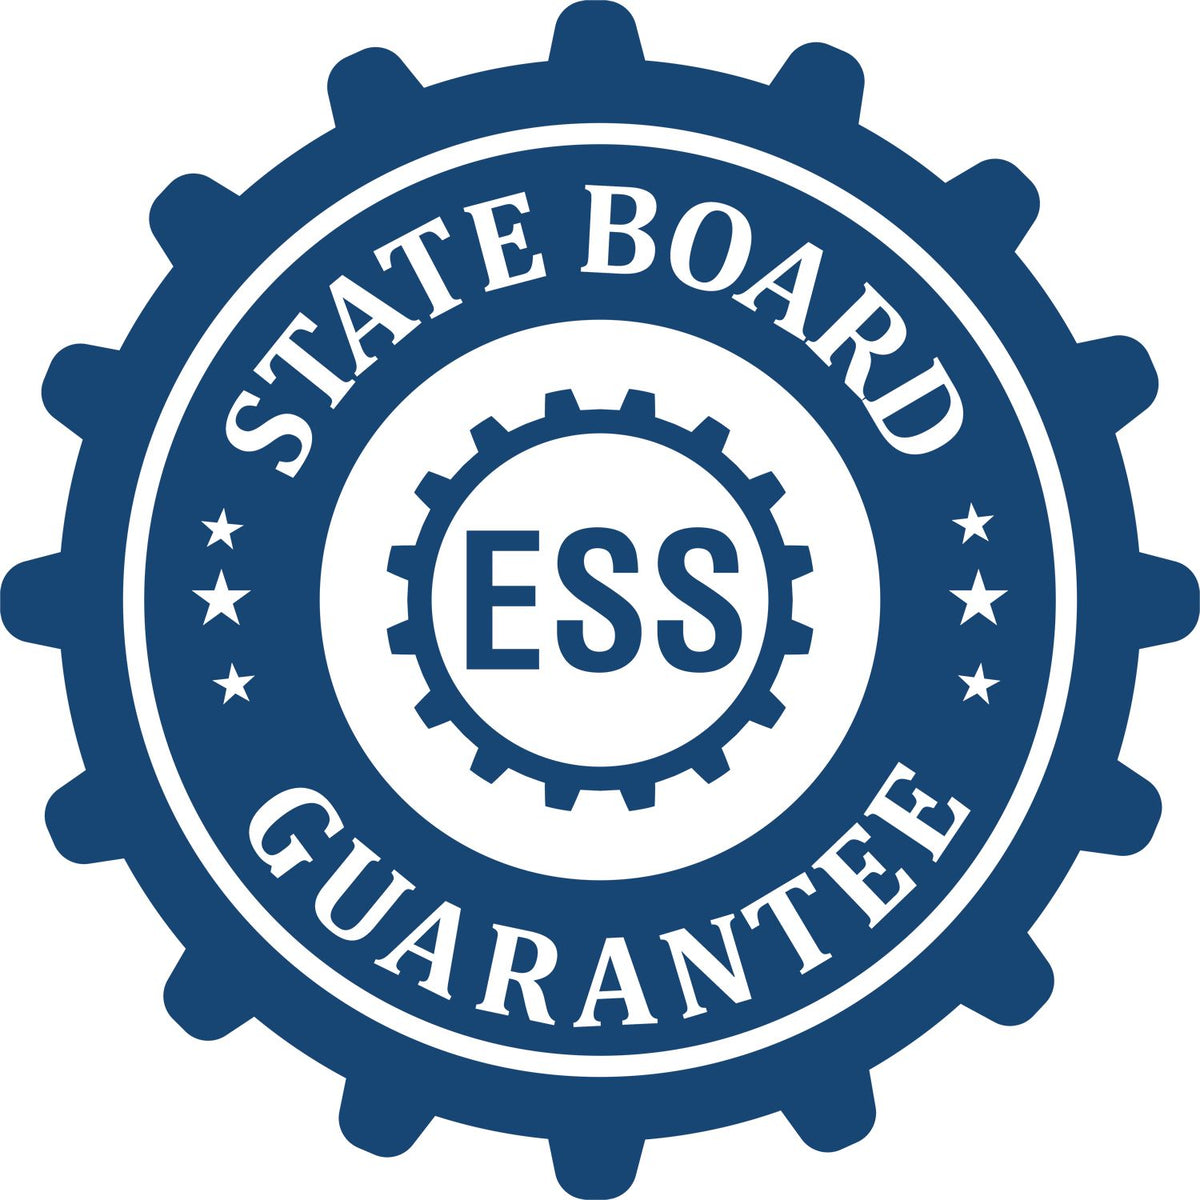 An emblem in a gear shape illustrating a state board guarantee for the Digital Alabama PE Stamp and Electronic Seal for Alabama Engineer product.